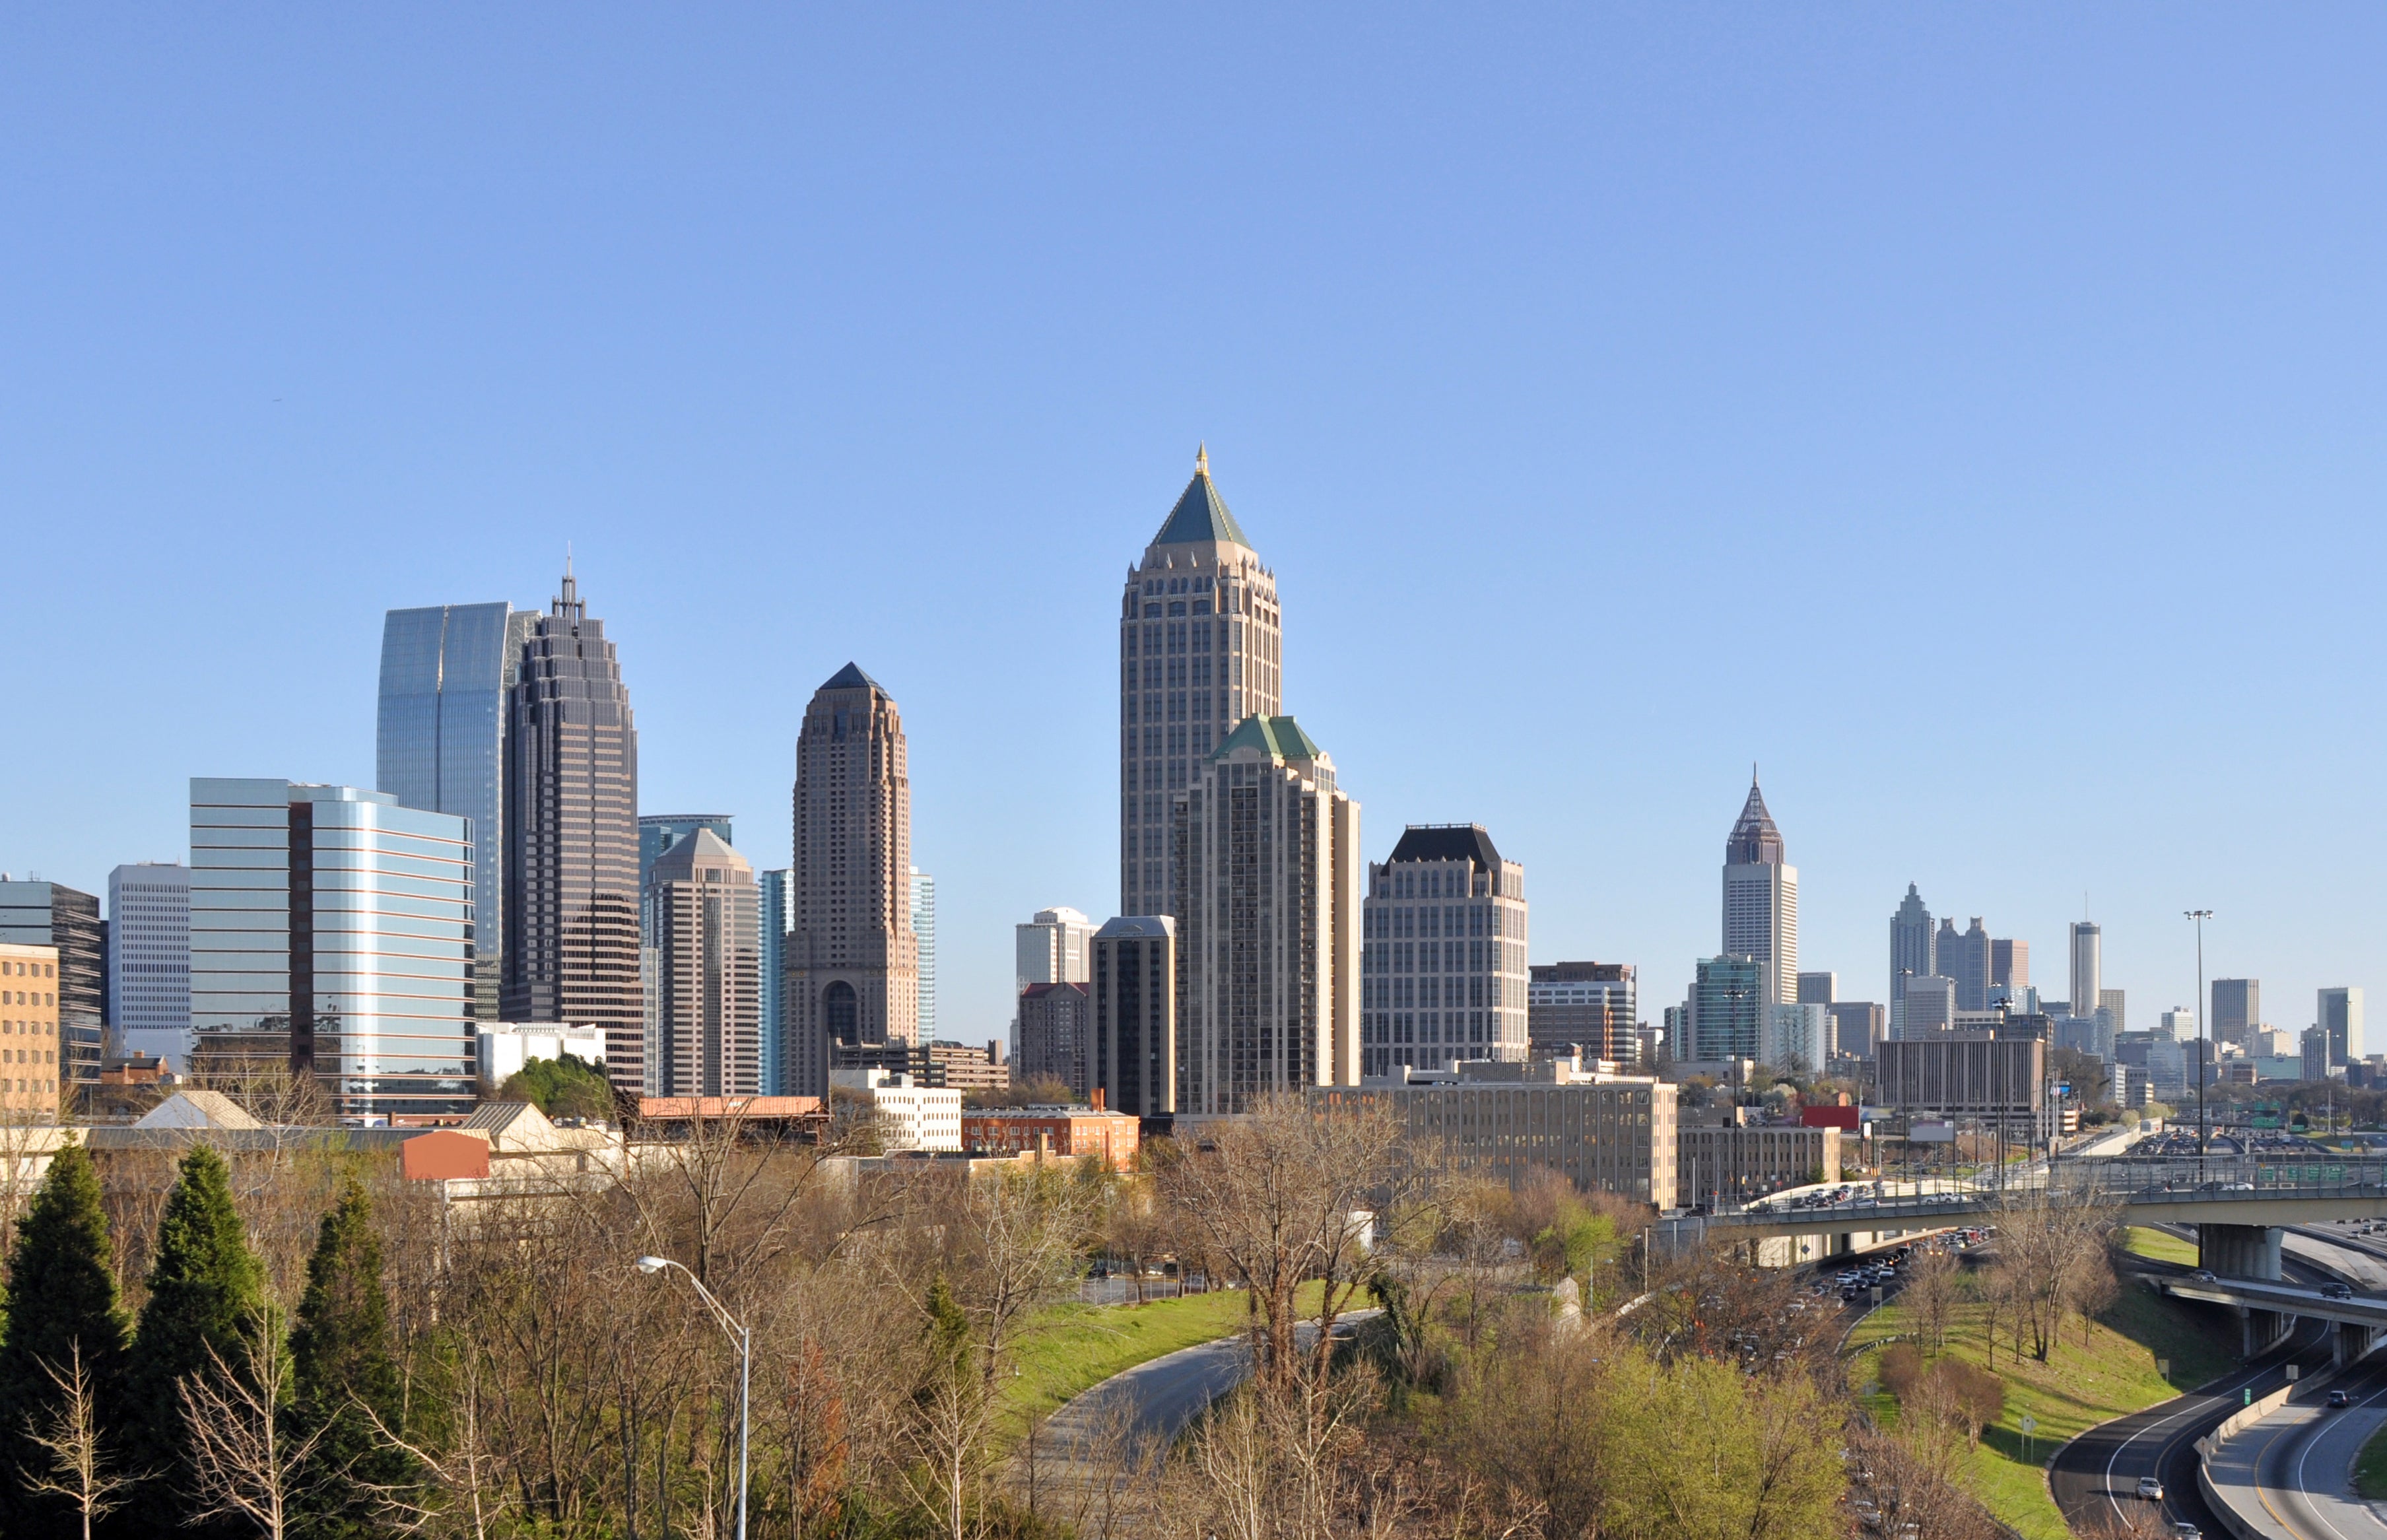 A view of the skyline of Atlanta, Georgia with midtown in the foreground and downtown in the background.